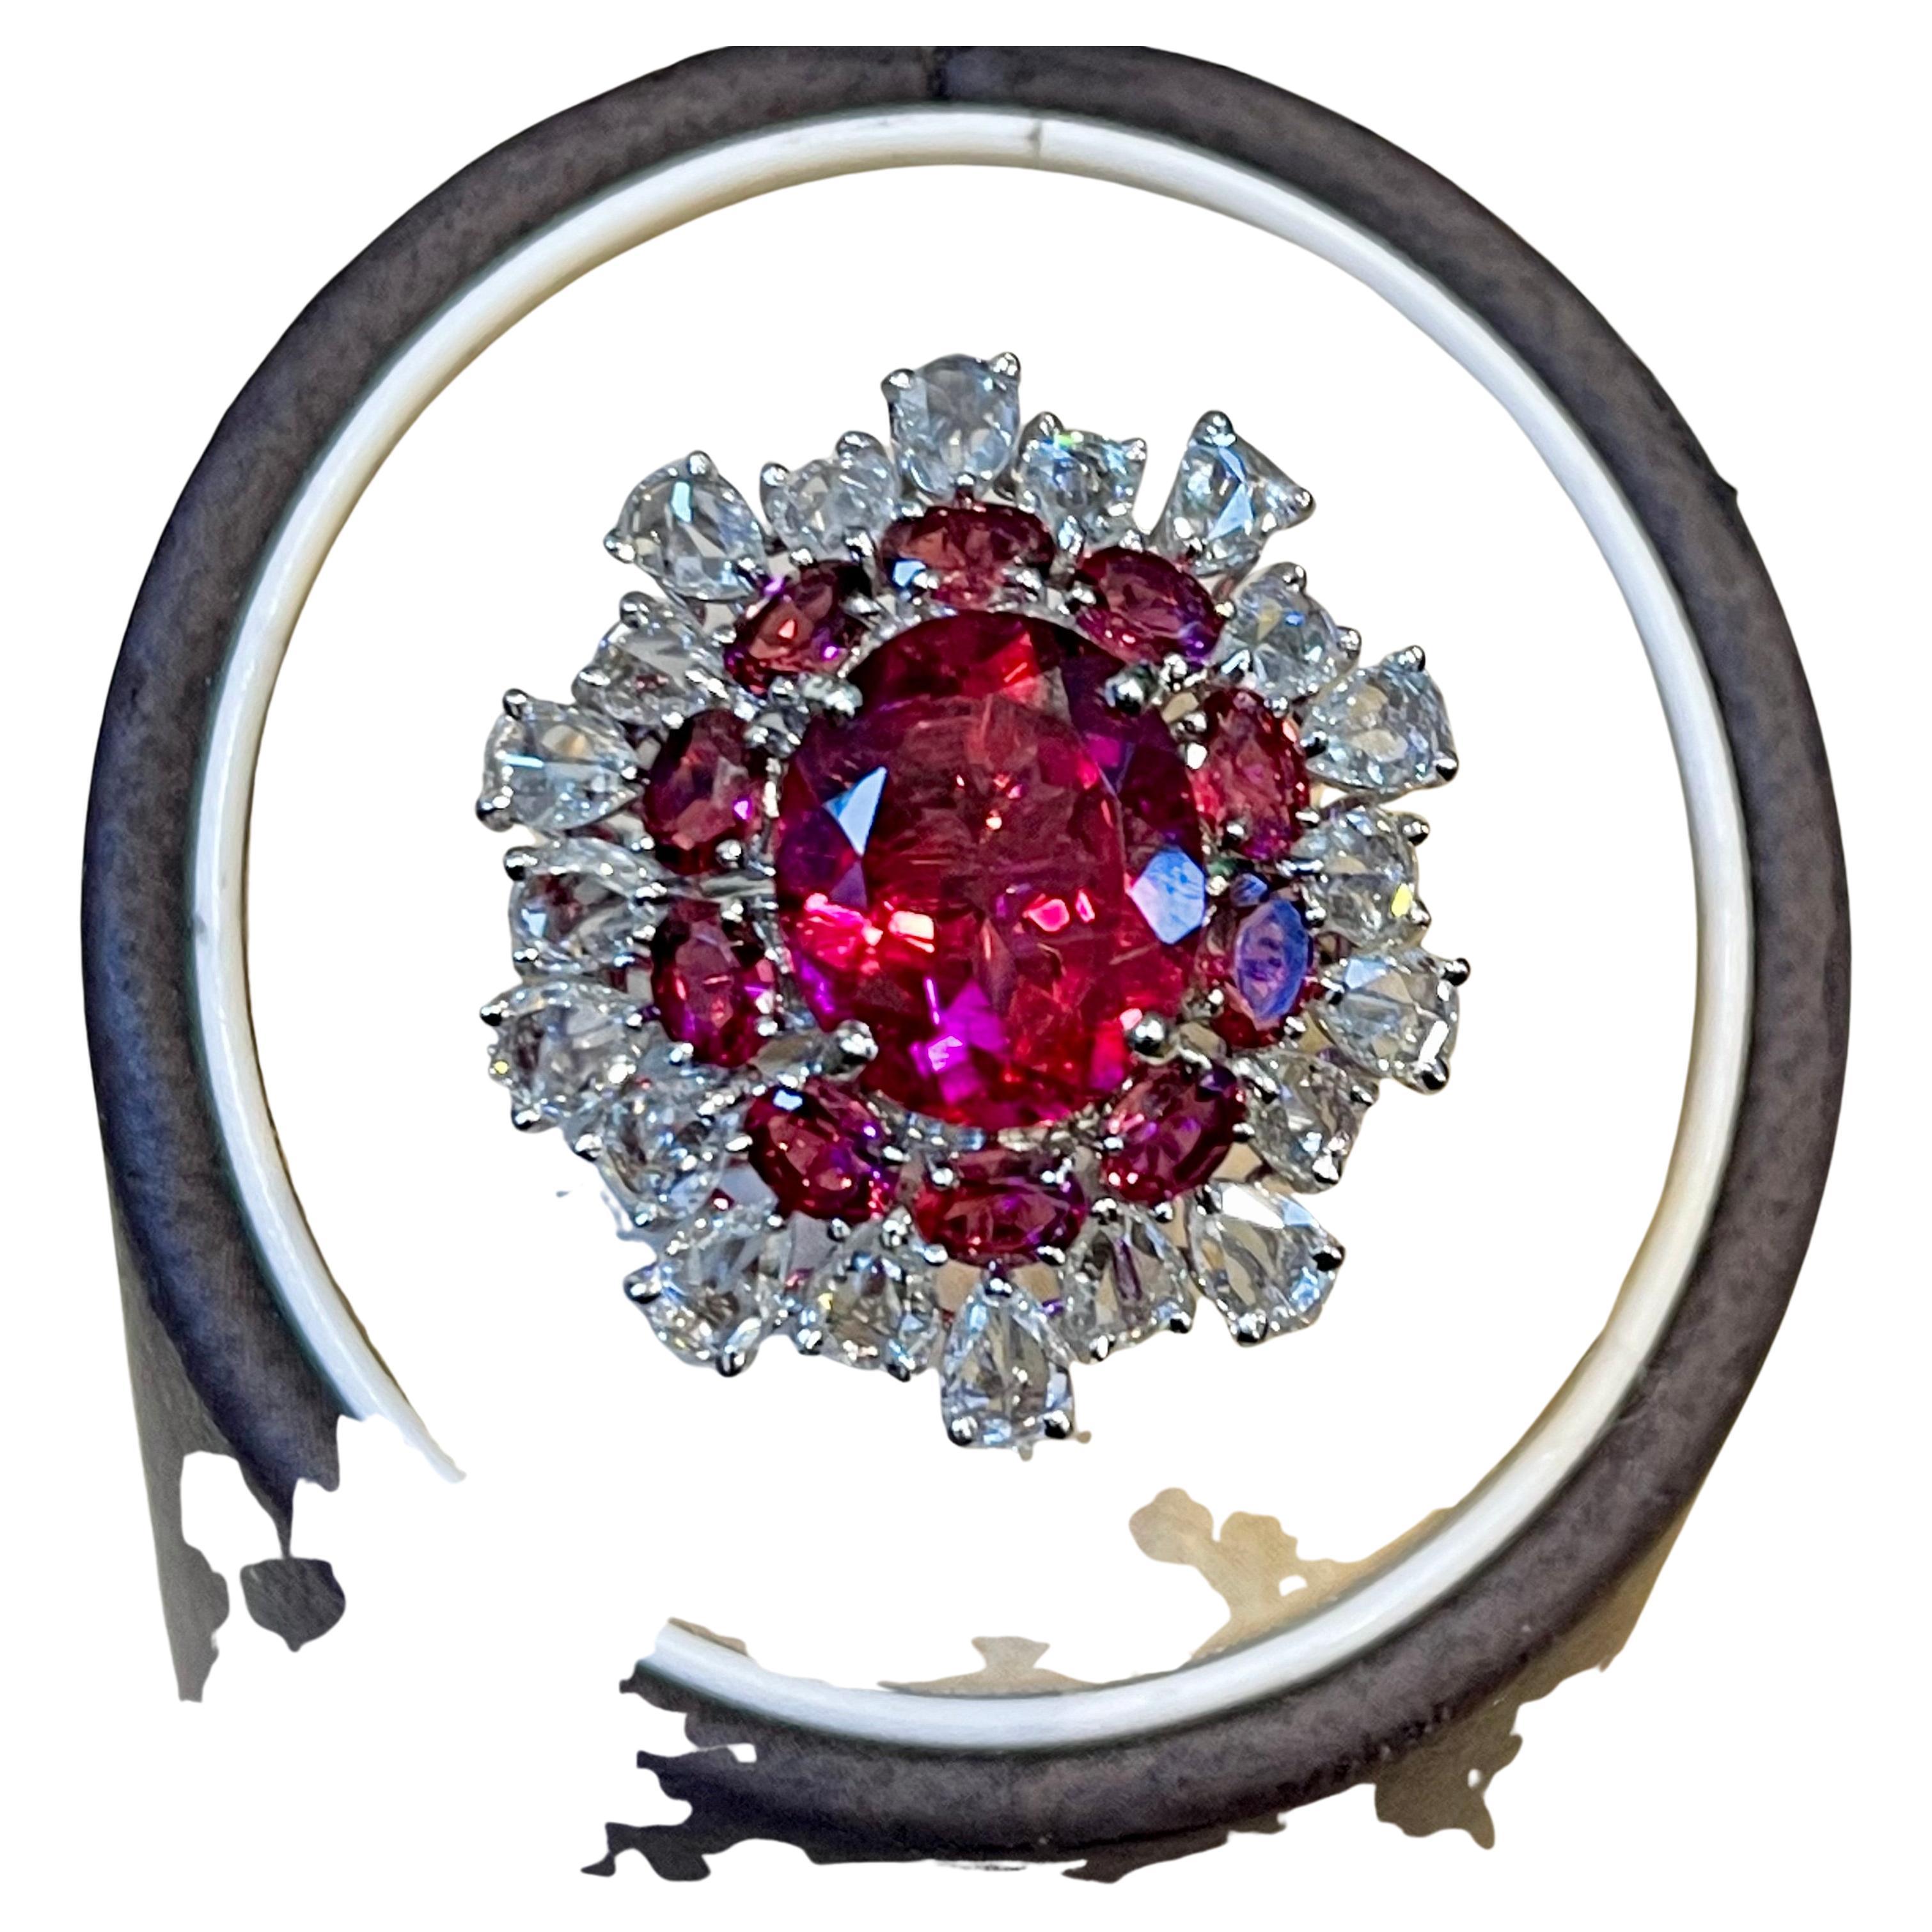 A classic, Cocktail ring 
5 Carat Rubelite and 4.5 Carat Diamond 18 Karat White  Gold Cocktail Ring Estate
Gold: 18 Karat White gold 
Weight: 7.76 gram
Size of the ring 6, It can be resized for free of charge.
Center oval shape Rubelite of high